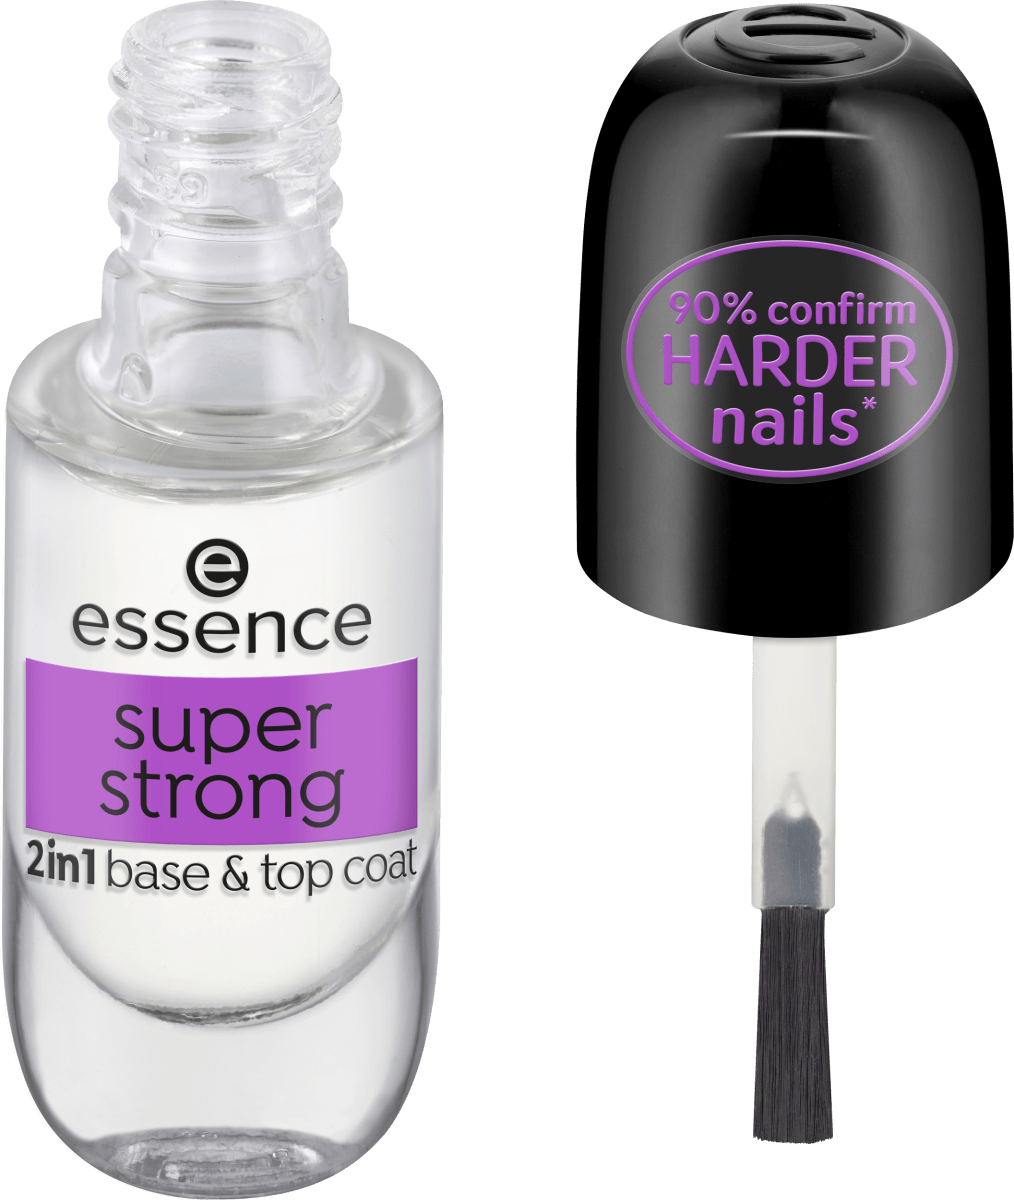 essence Base & Top 8 Super ml 2in1, Strong Coat